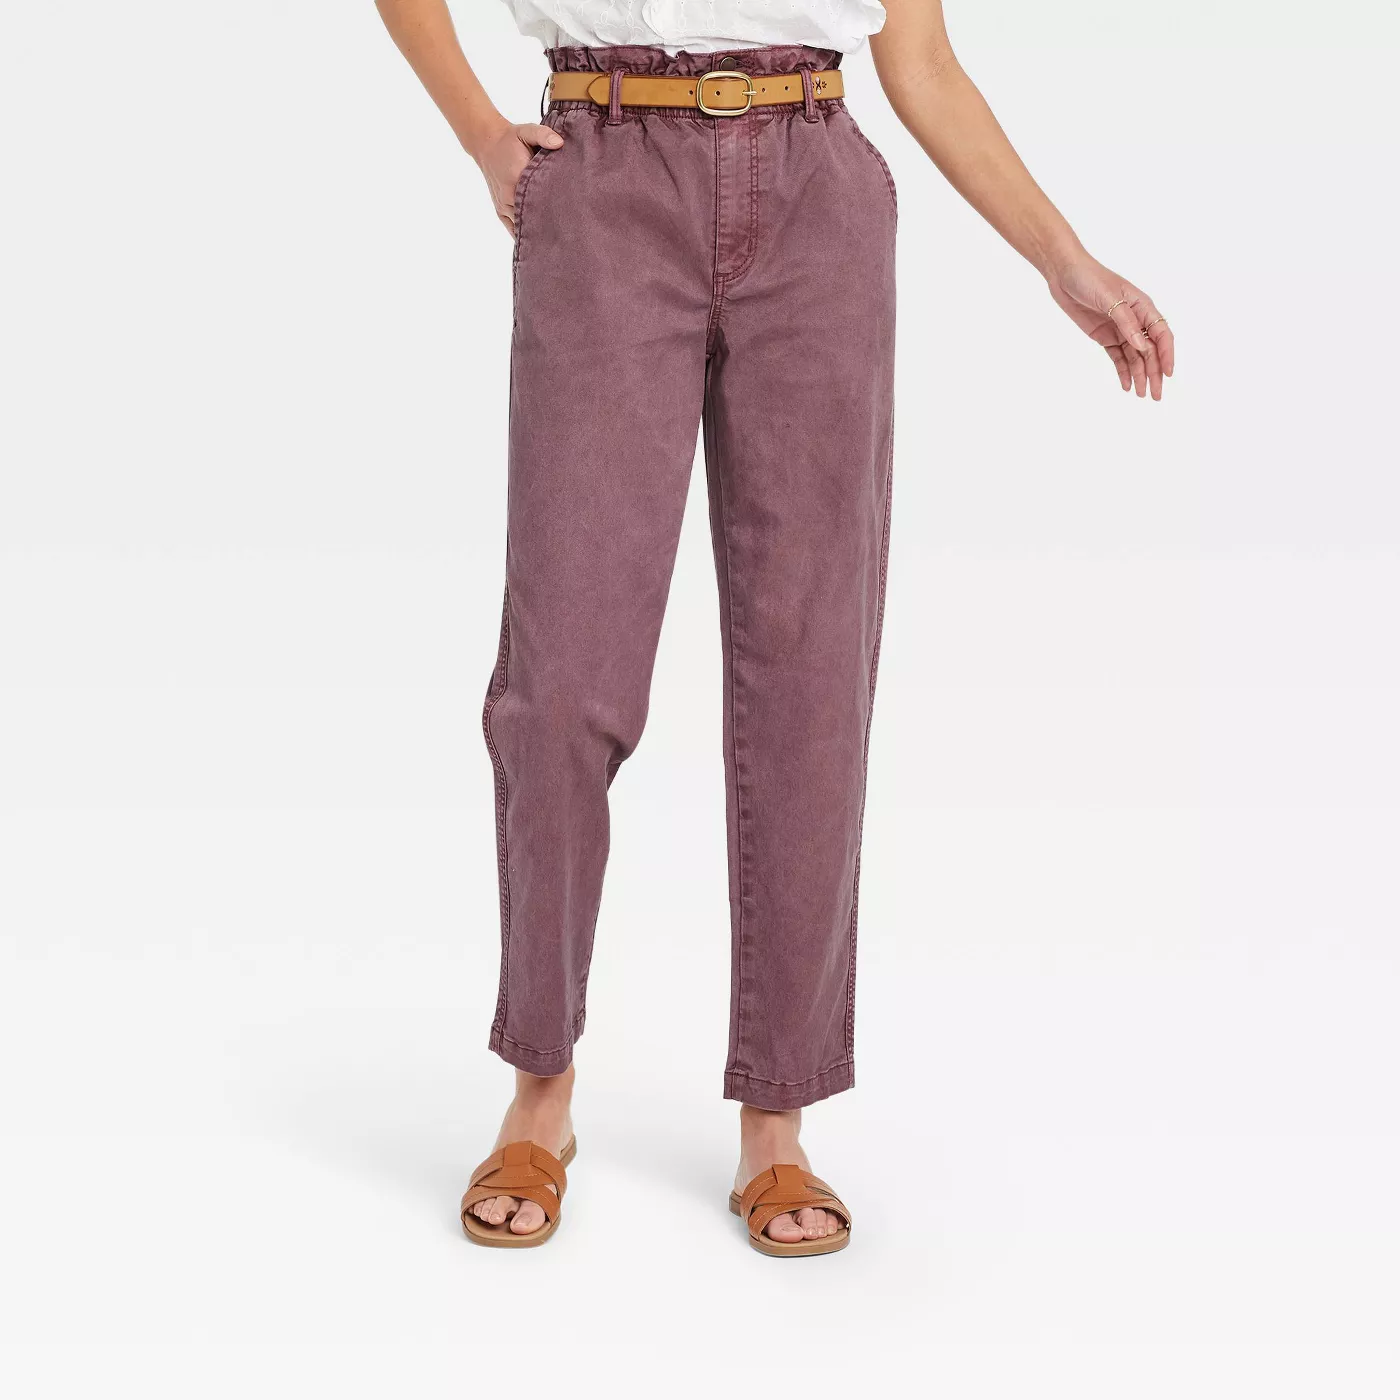 Women's High-Rise Tapered Pants - Universal Thread™ - image 1 of 4